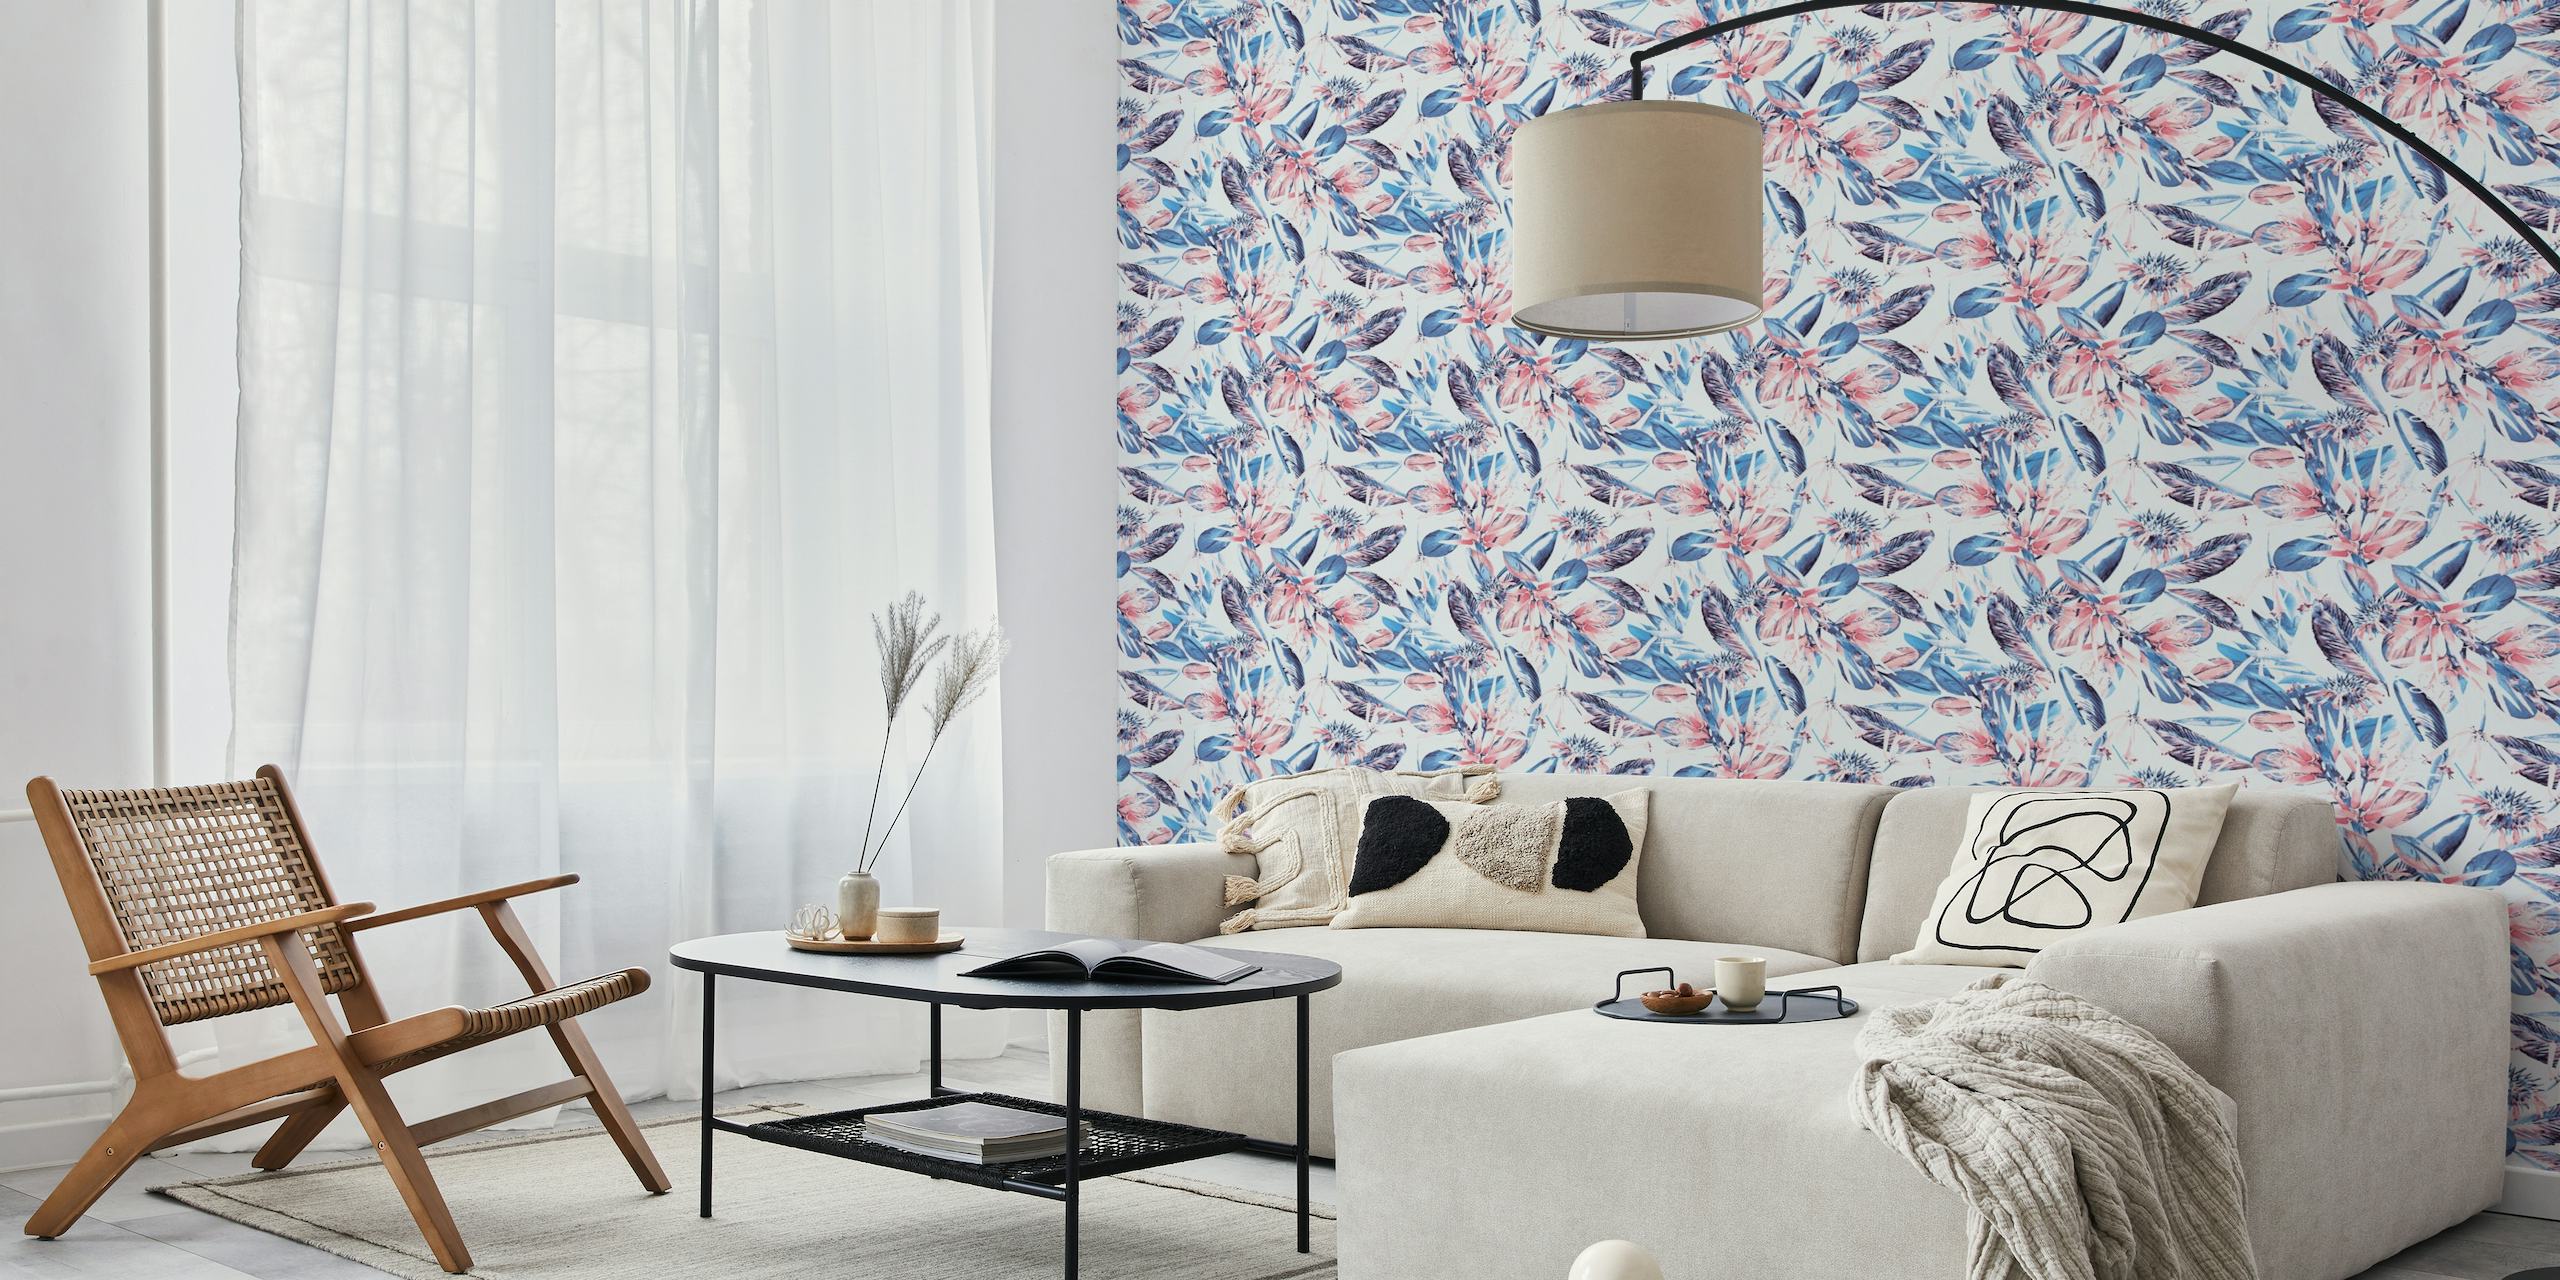 Abstract botanical wall mural in cobalt and carmine colors